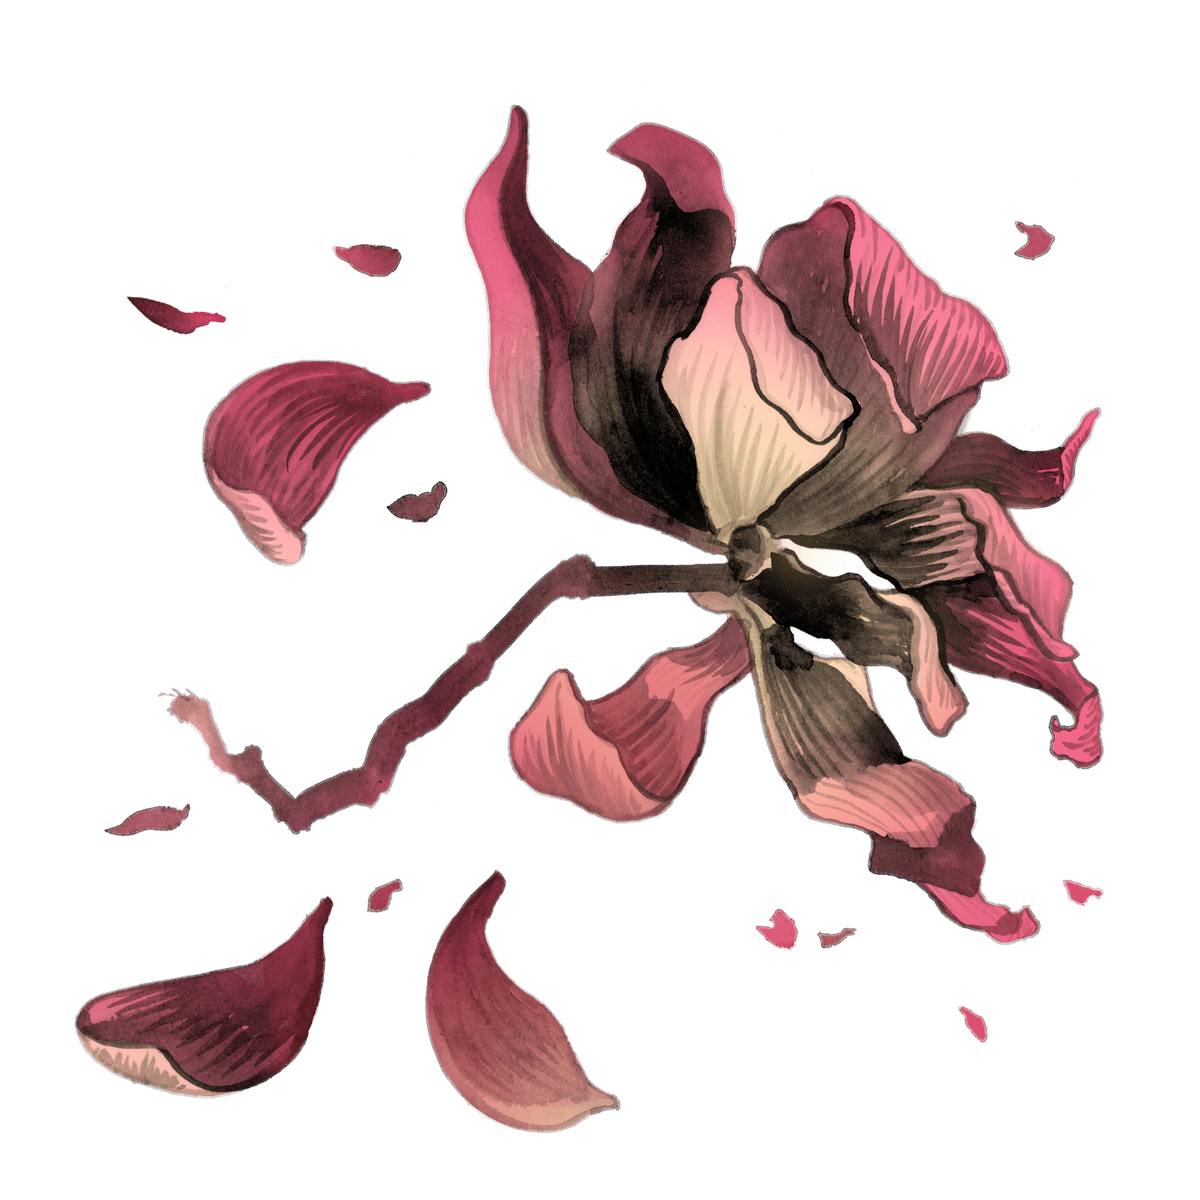 Illustration of a pink, wilting lotus flower with falling petals.